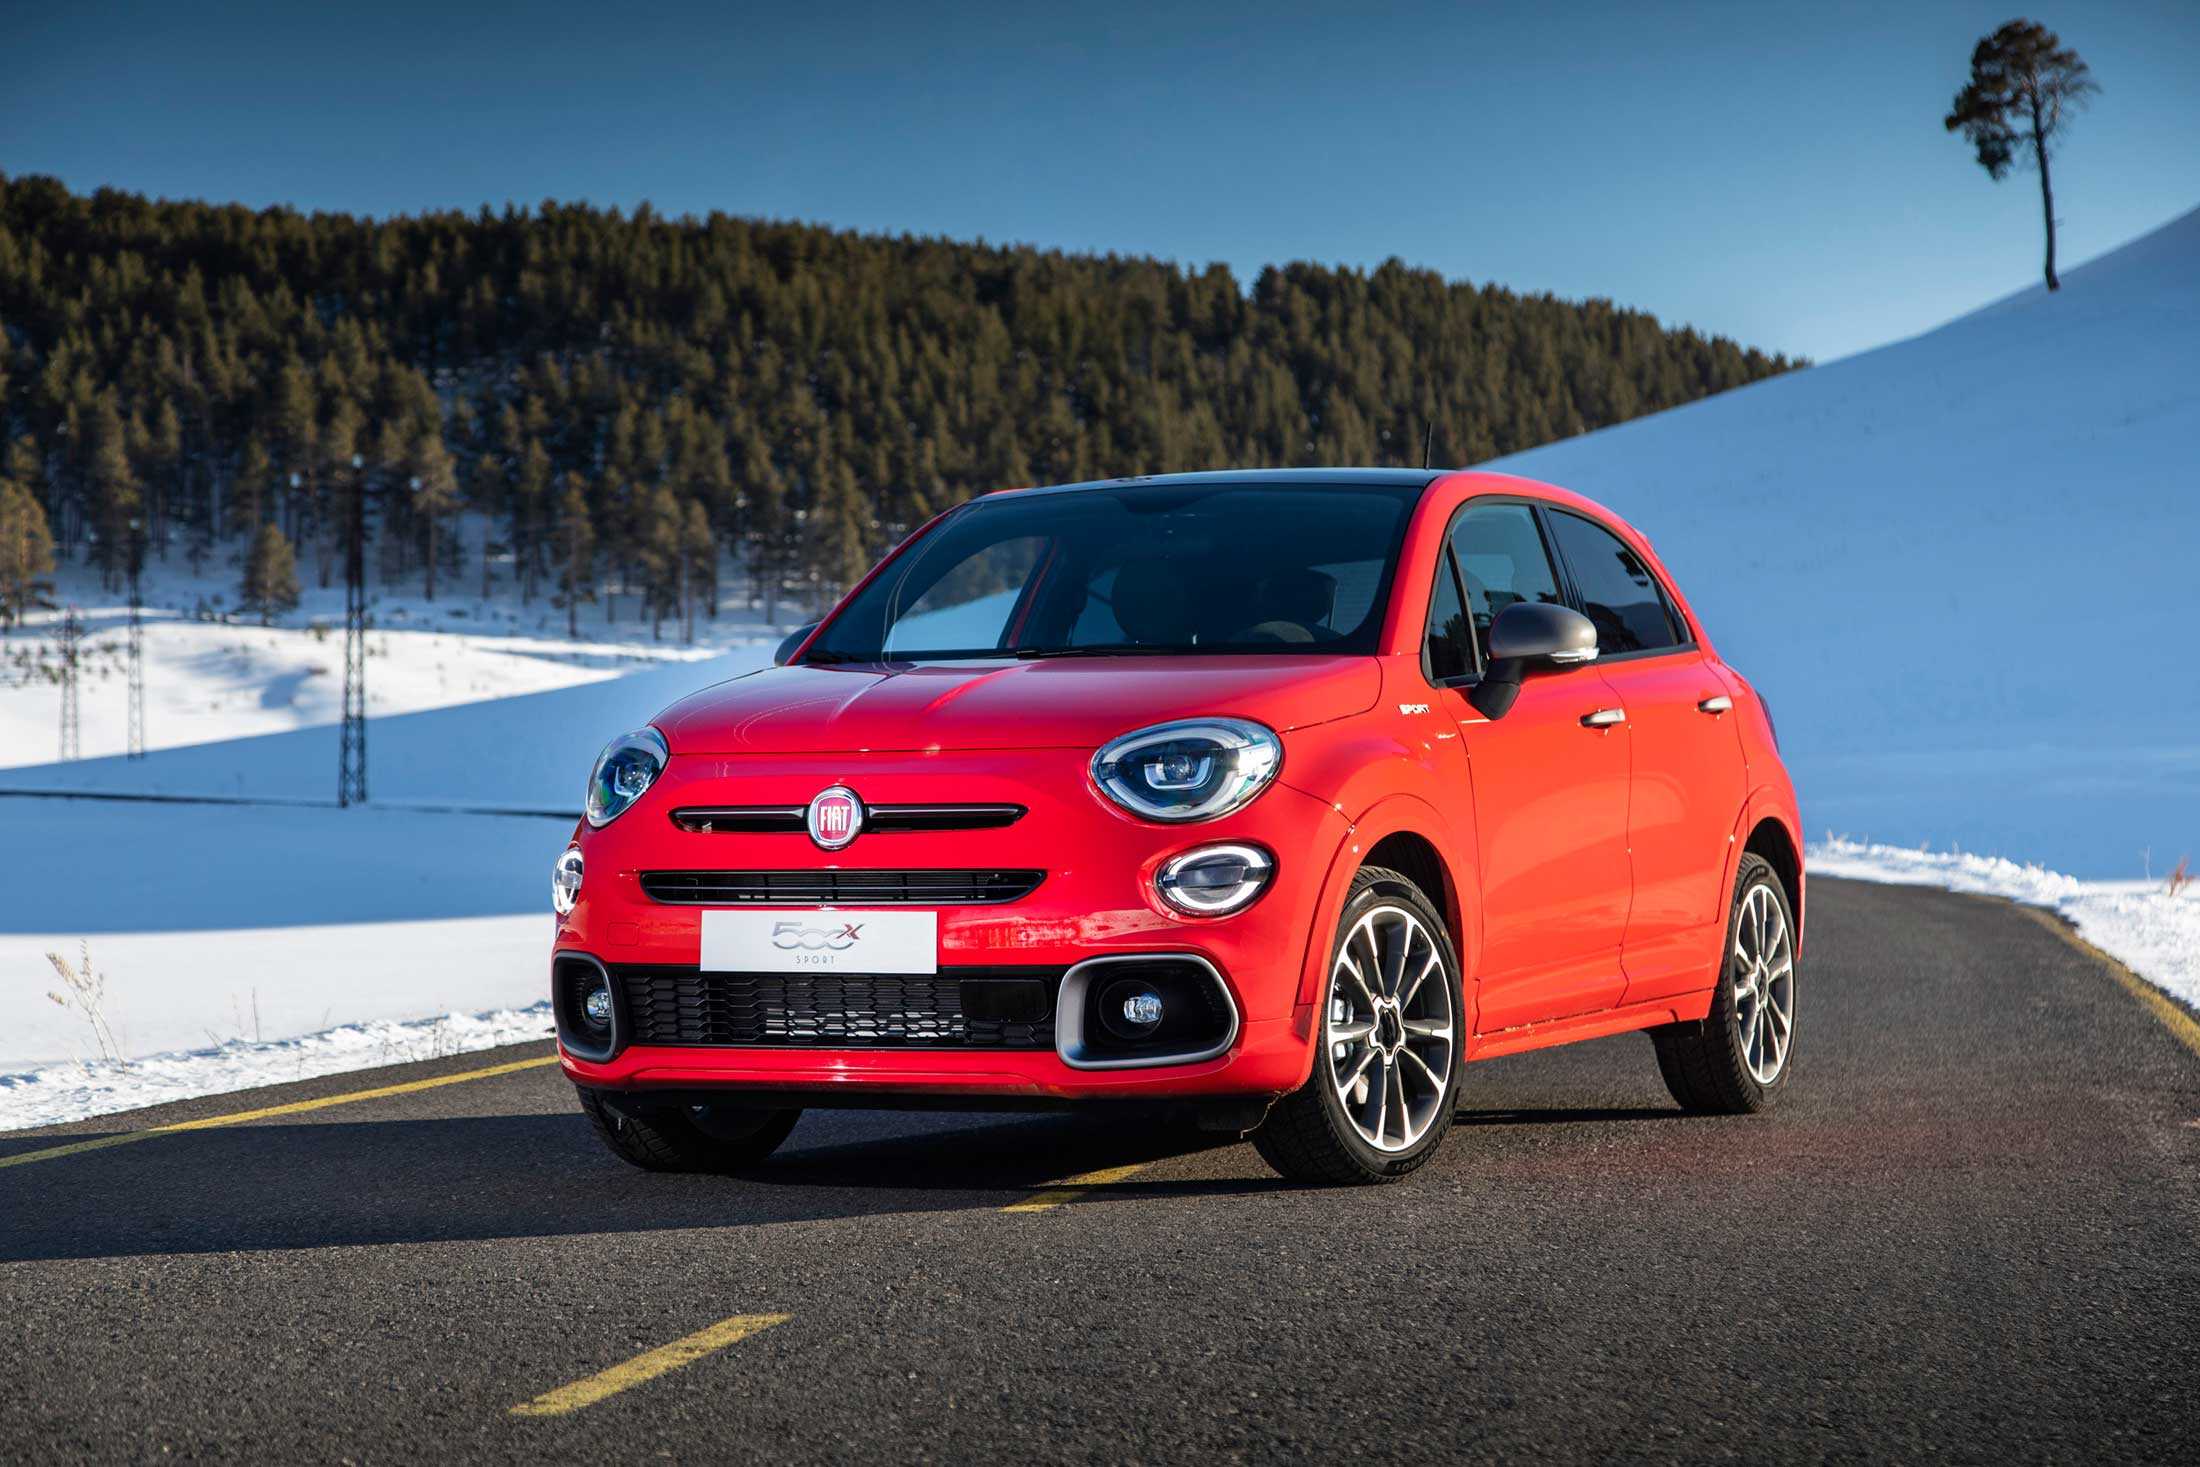 2012 fiat 500 abarth review | fiat 500 usa